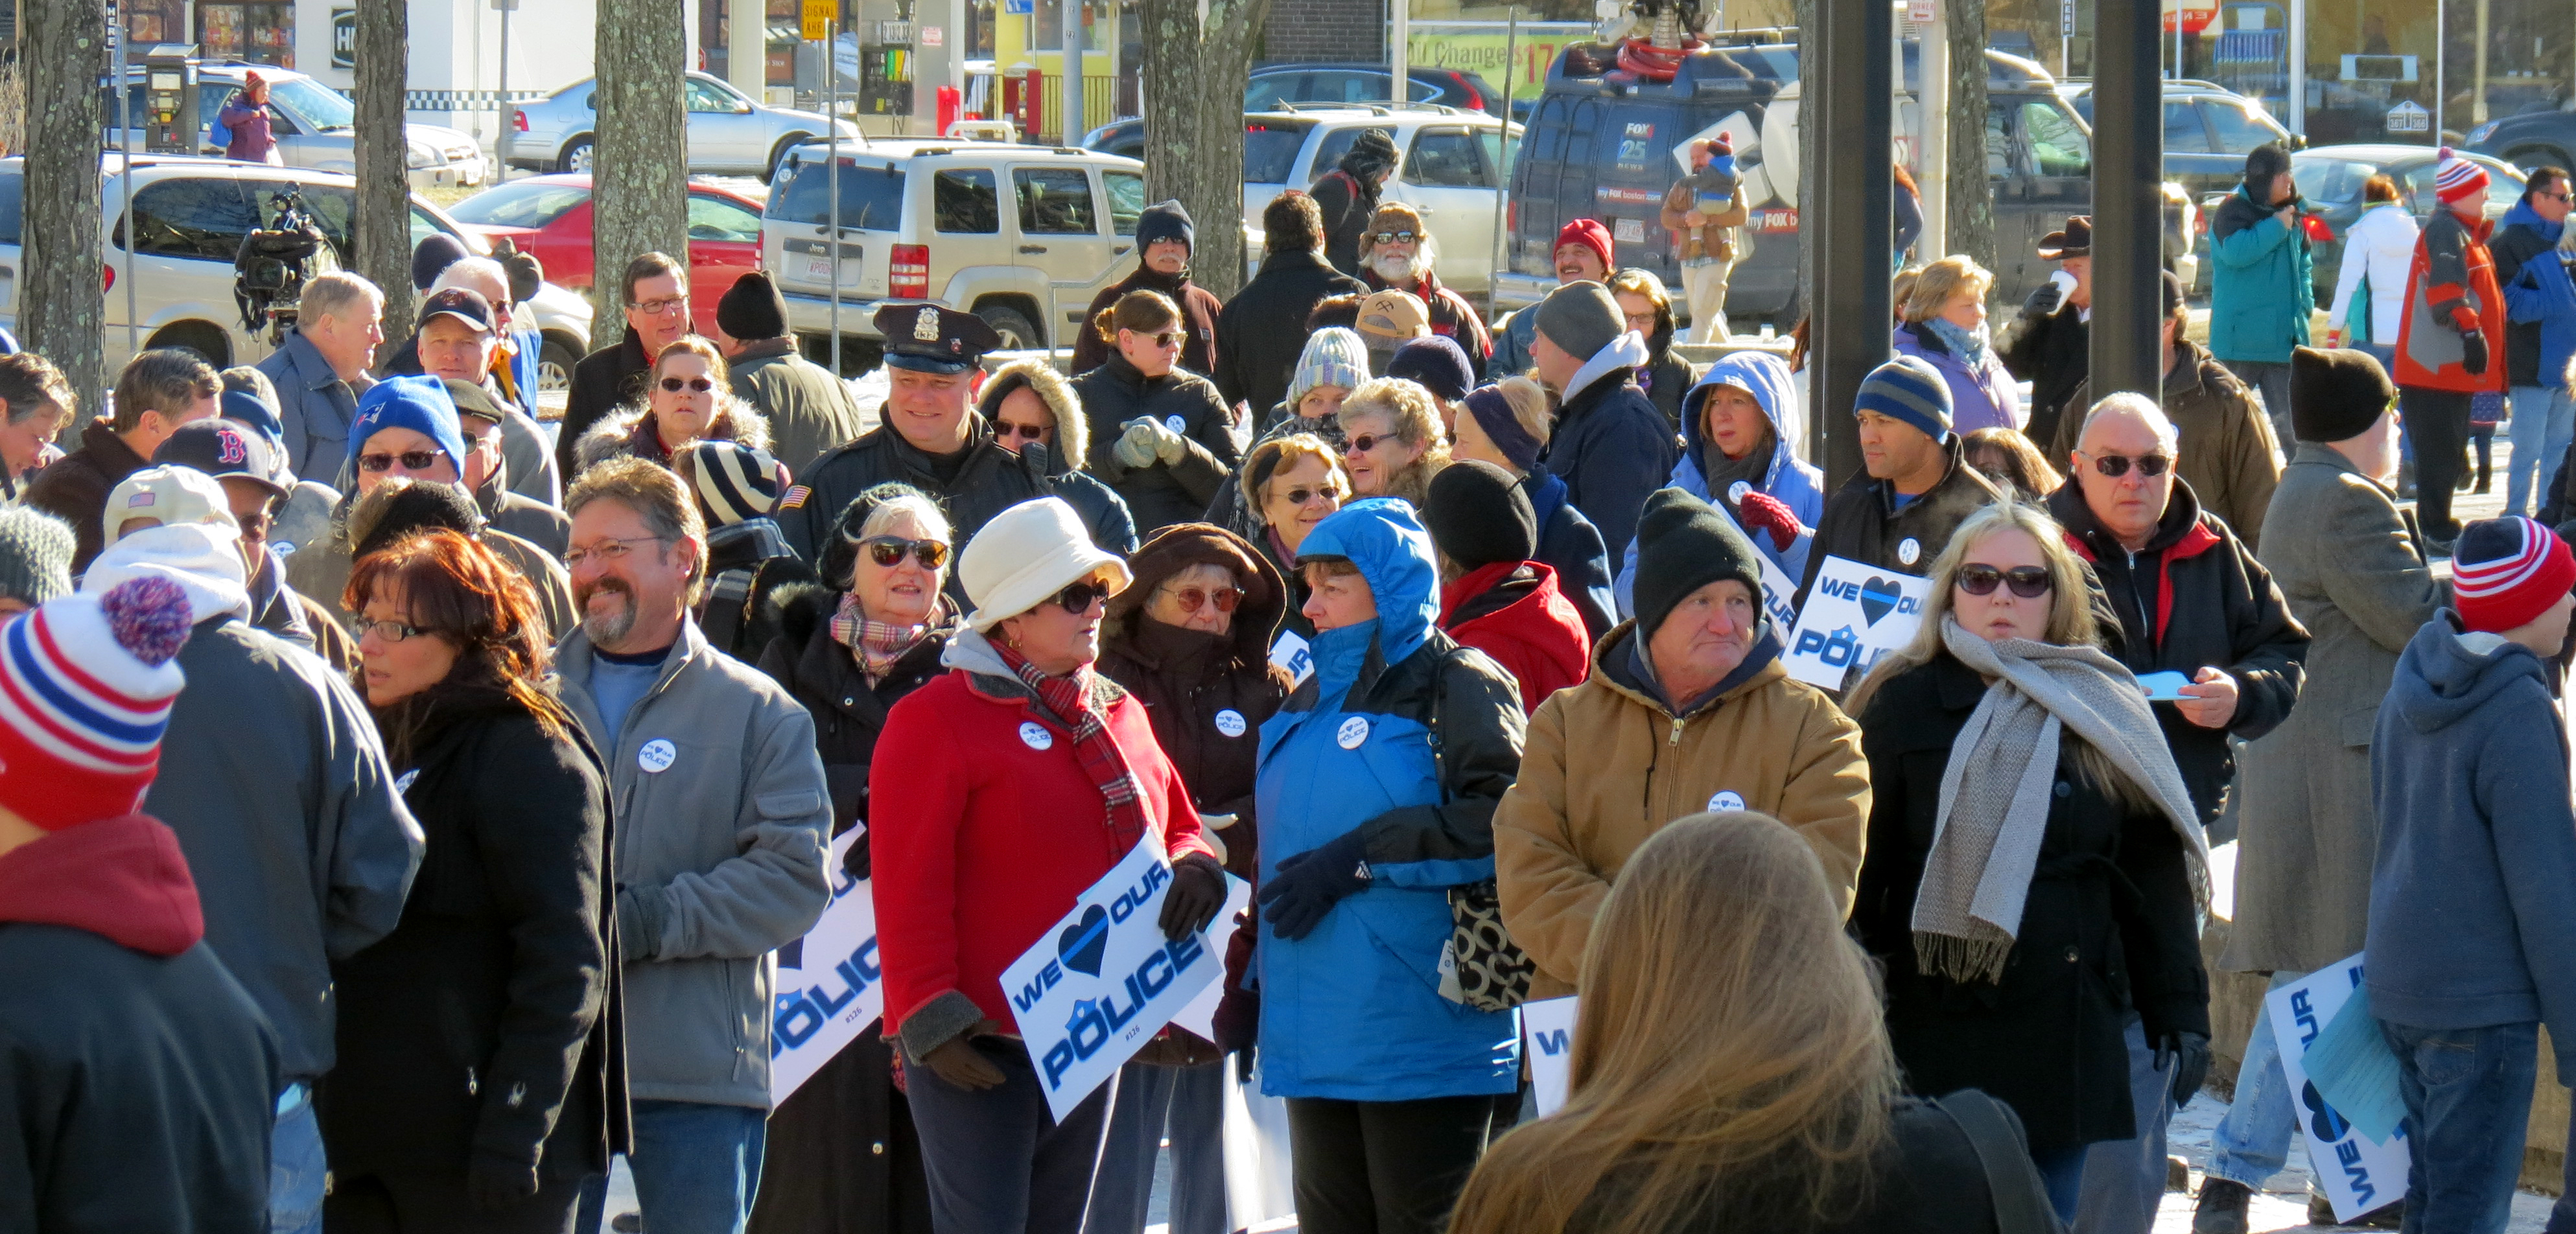 Video: Pro Police Rally in Lowell, Massachusetts, January 17, 2015